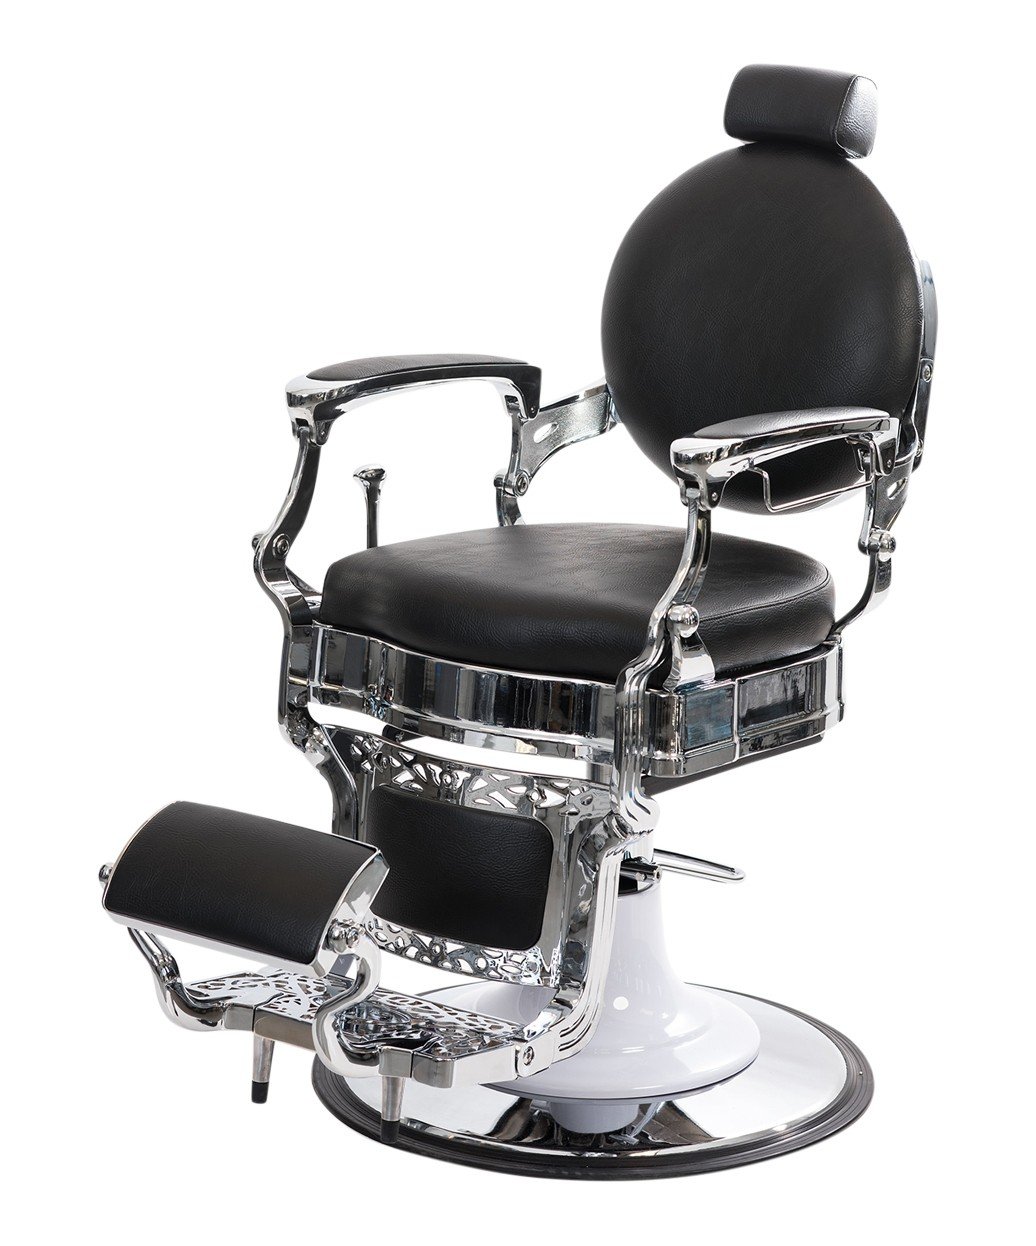 Capone Professional Barber Chair